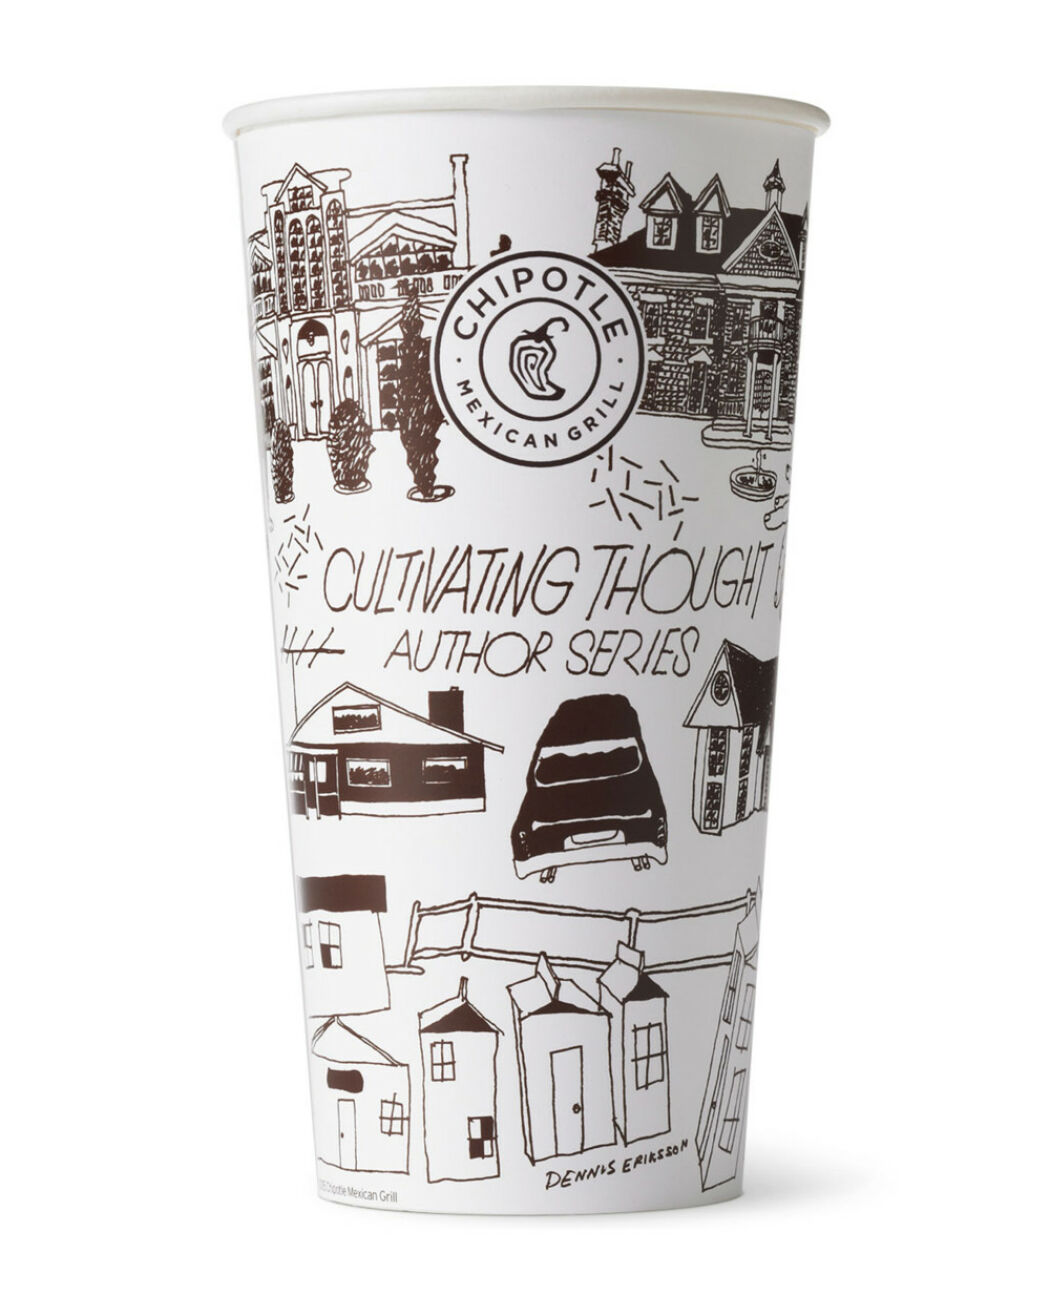 Coffemug and packaging design for Chipotle by Dennis Eriksson